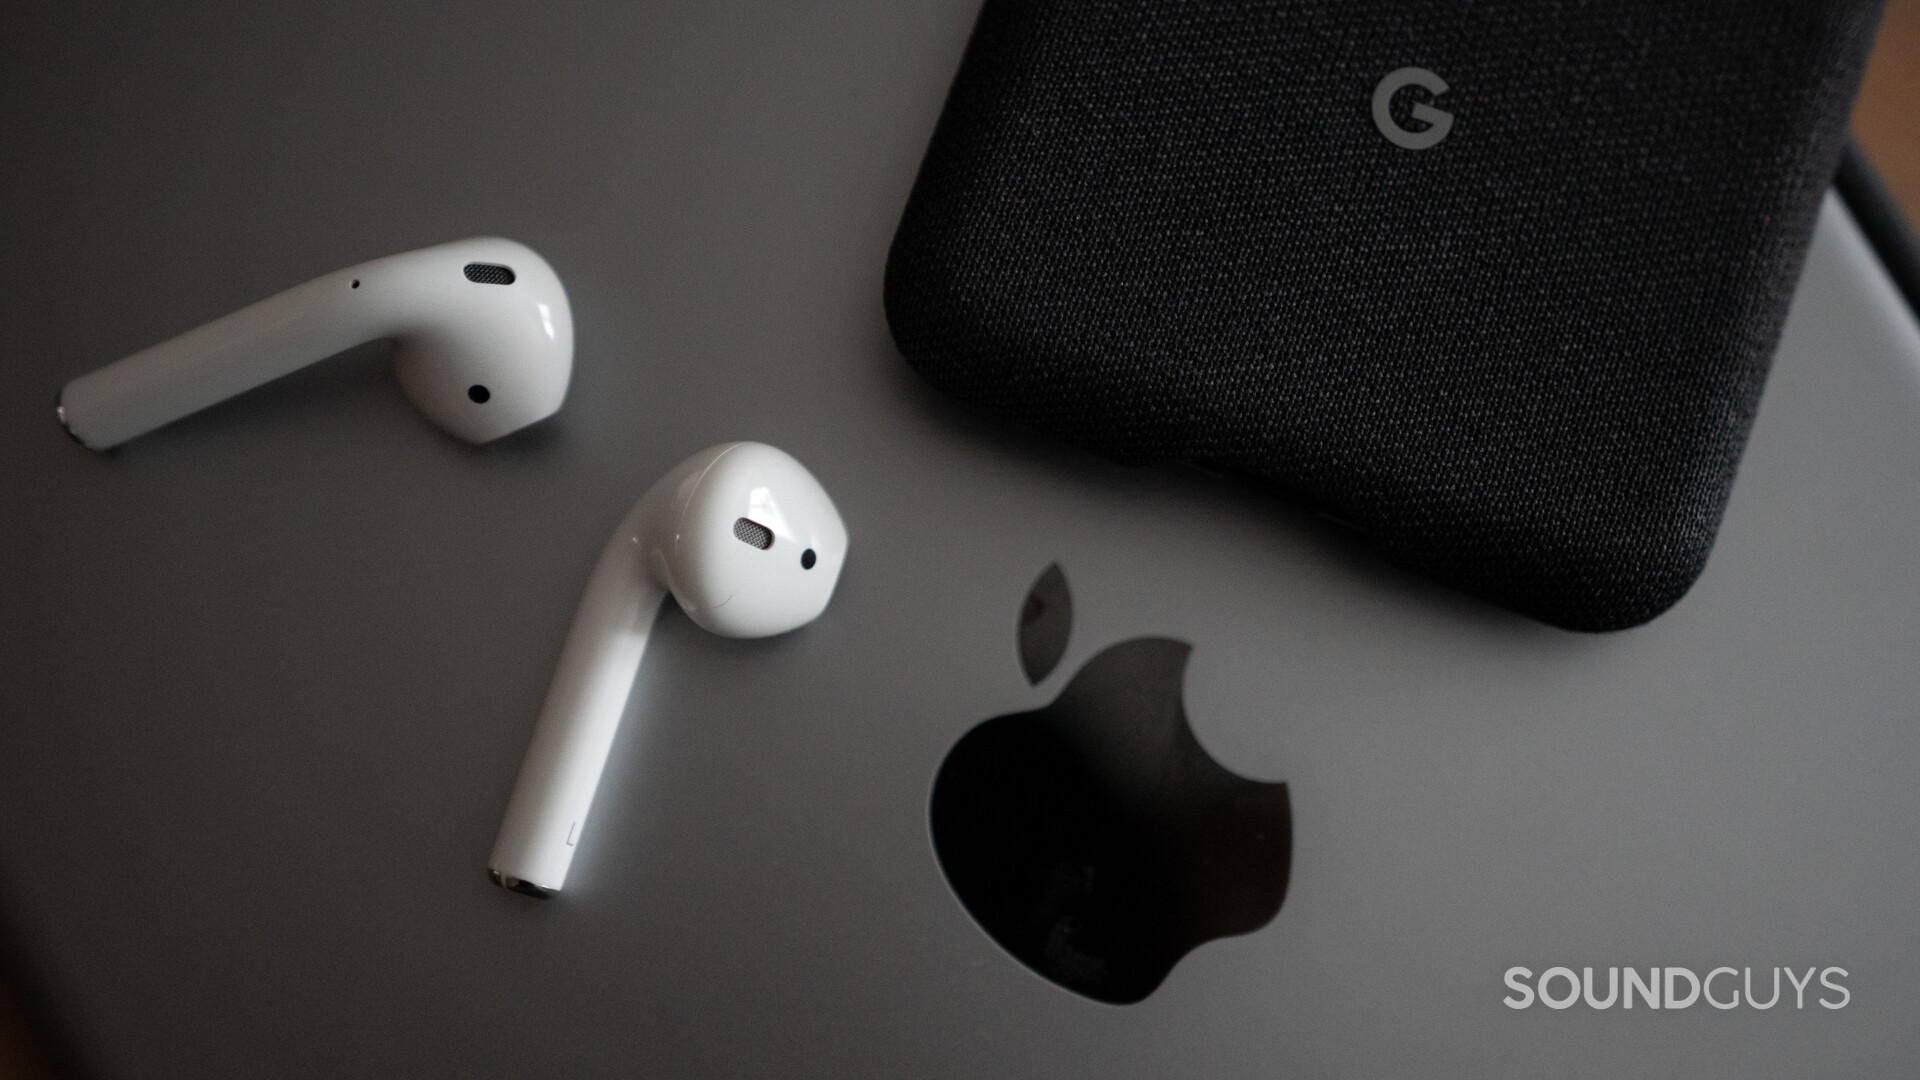 How to fix problems with AirPods - SoundGuys